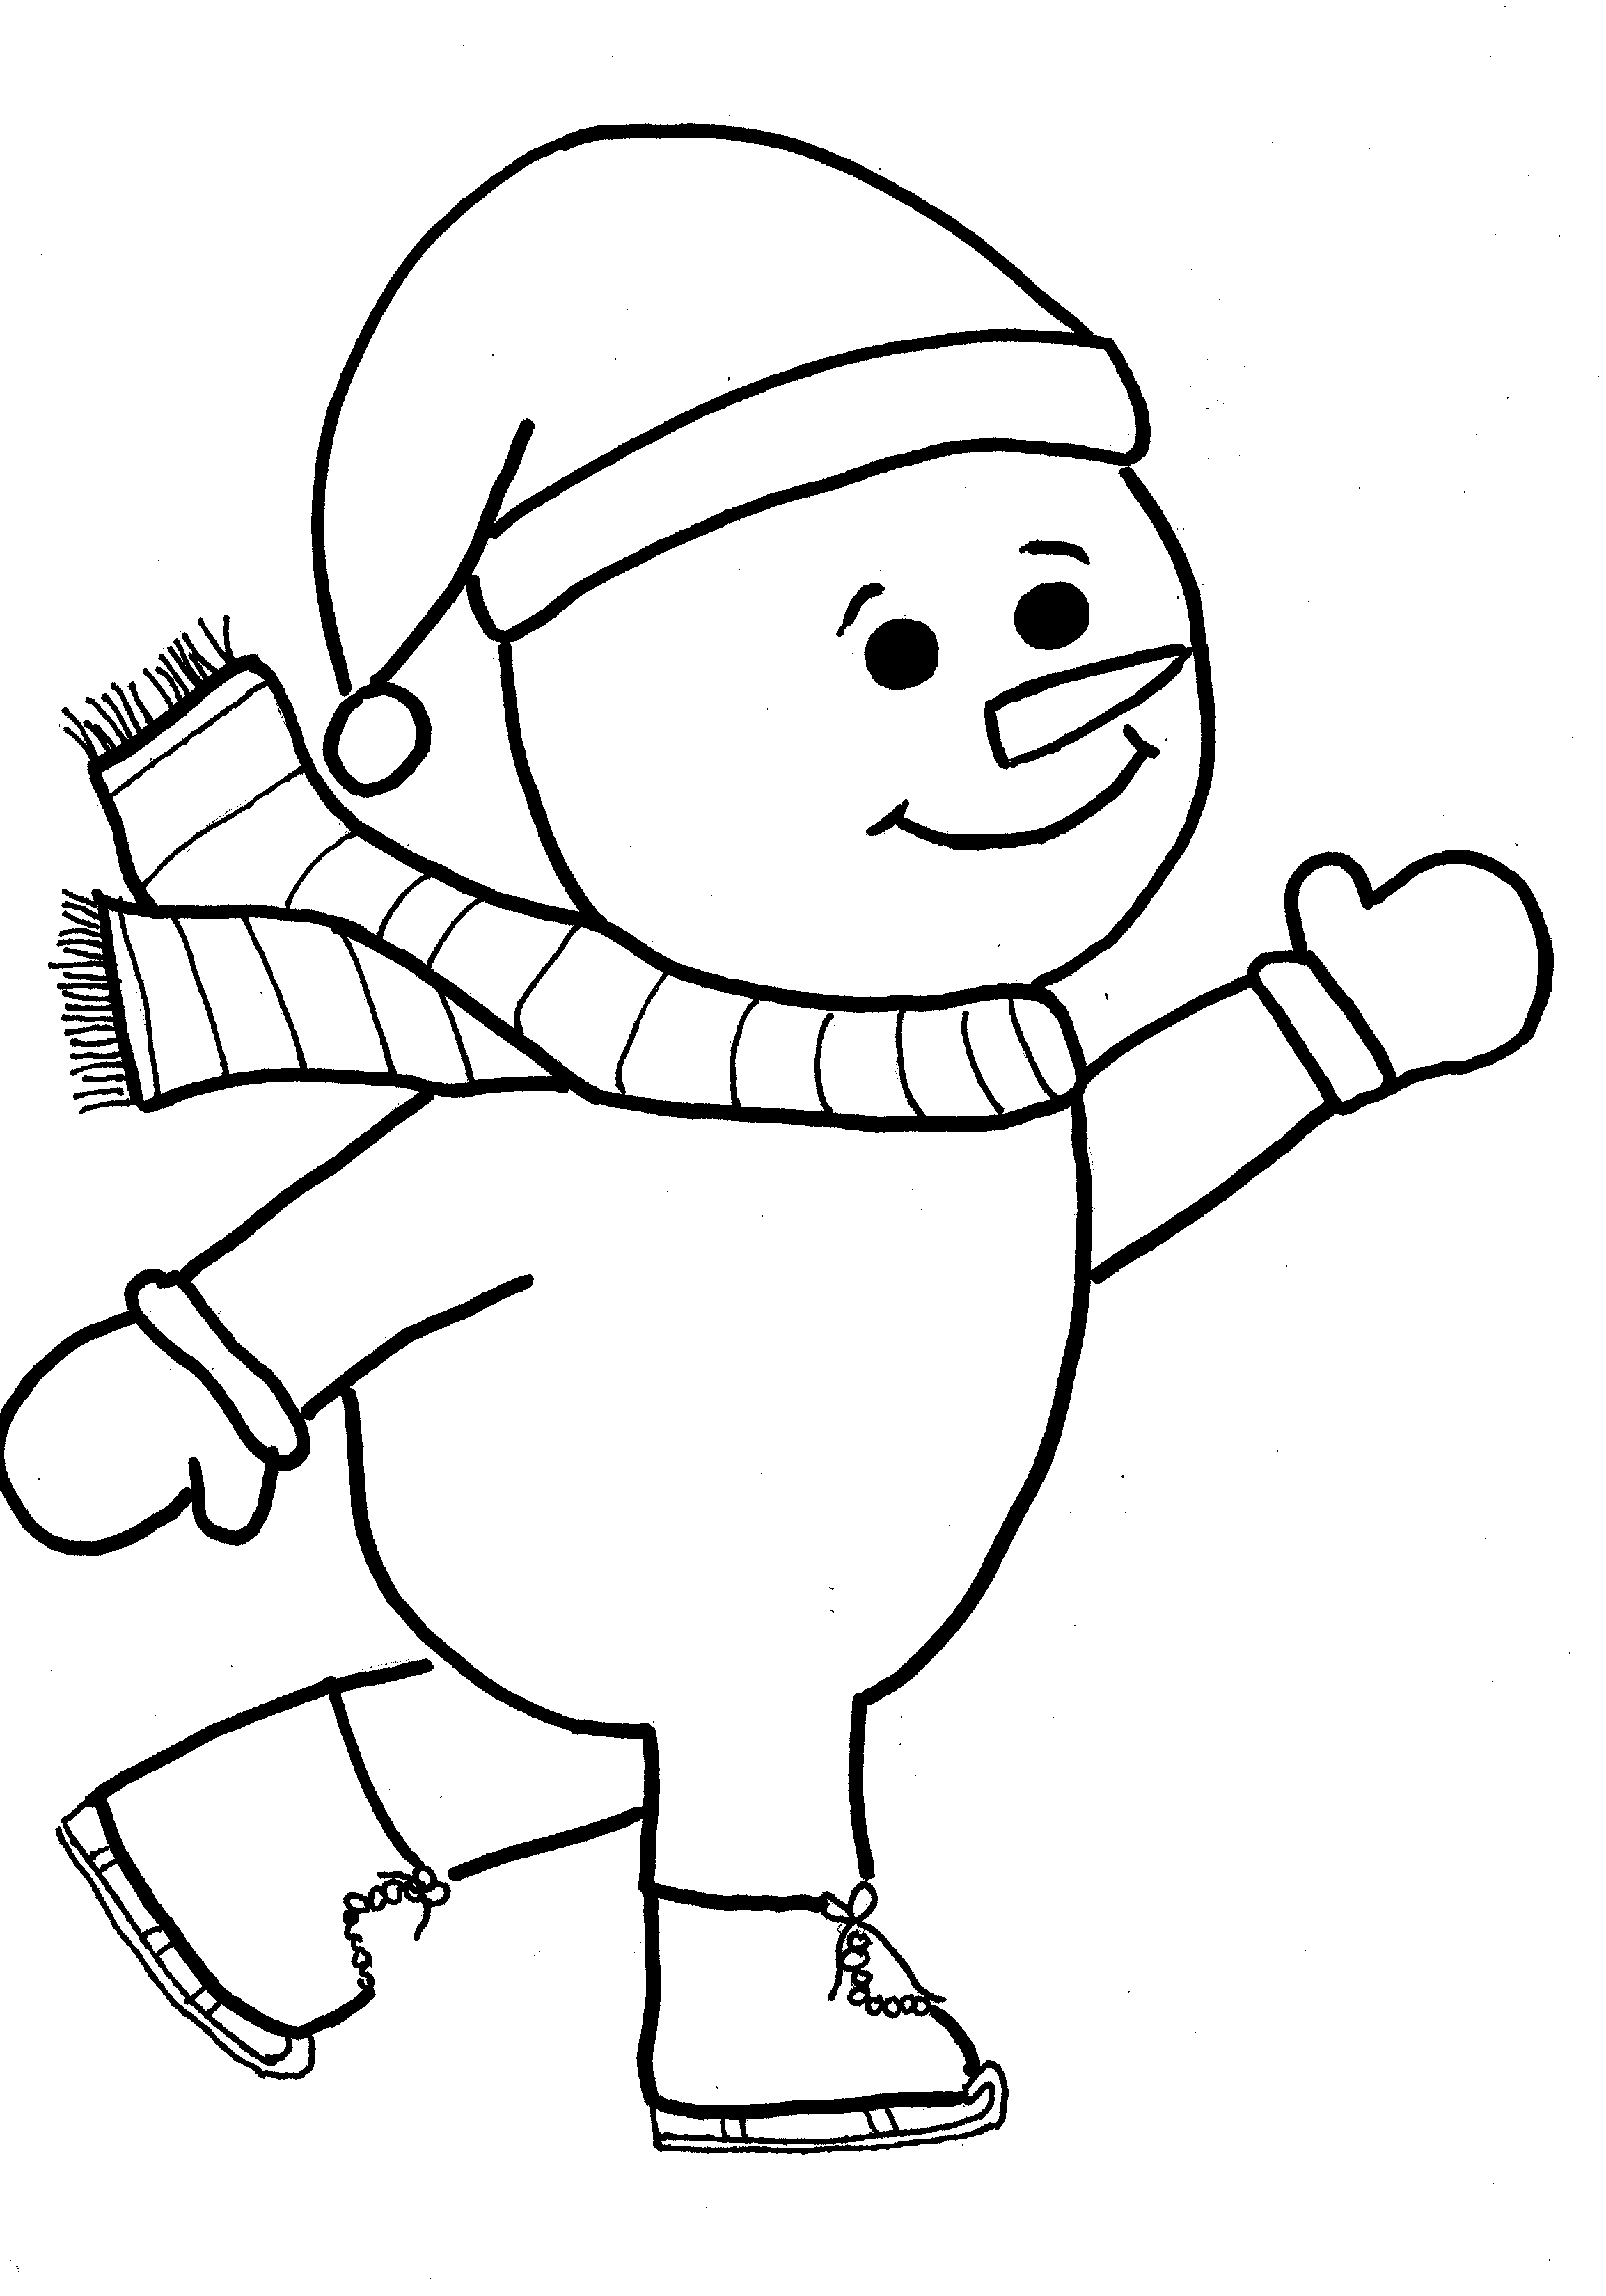 Skating Snowman Print Coloring Pages For Kids